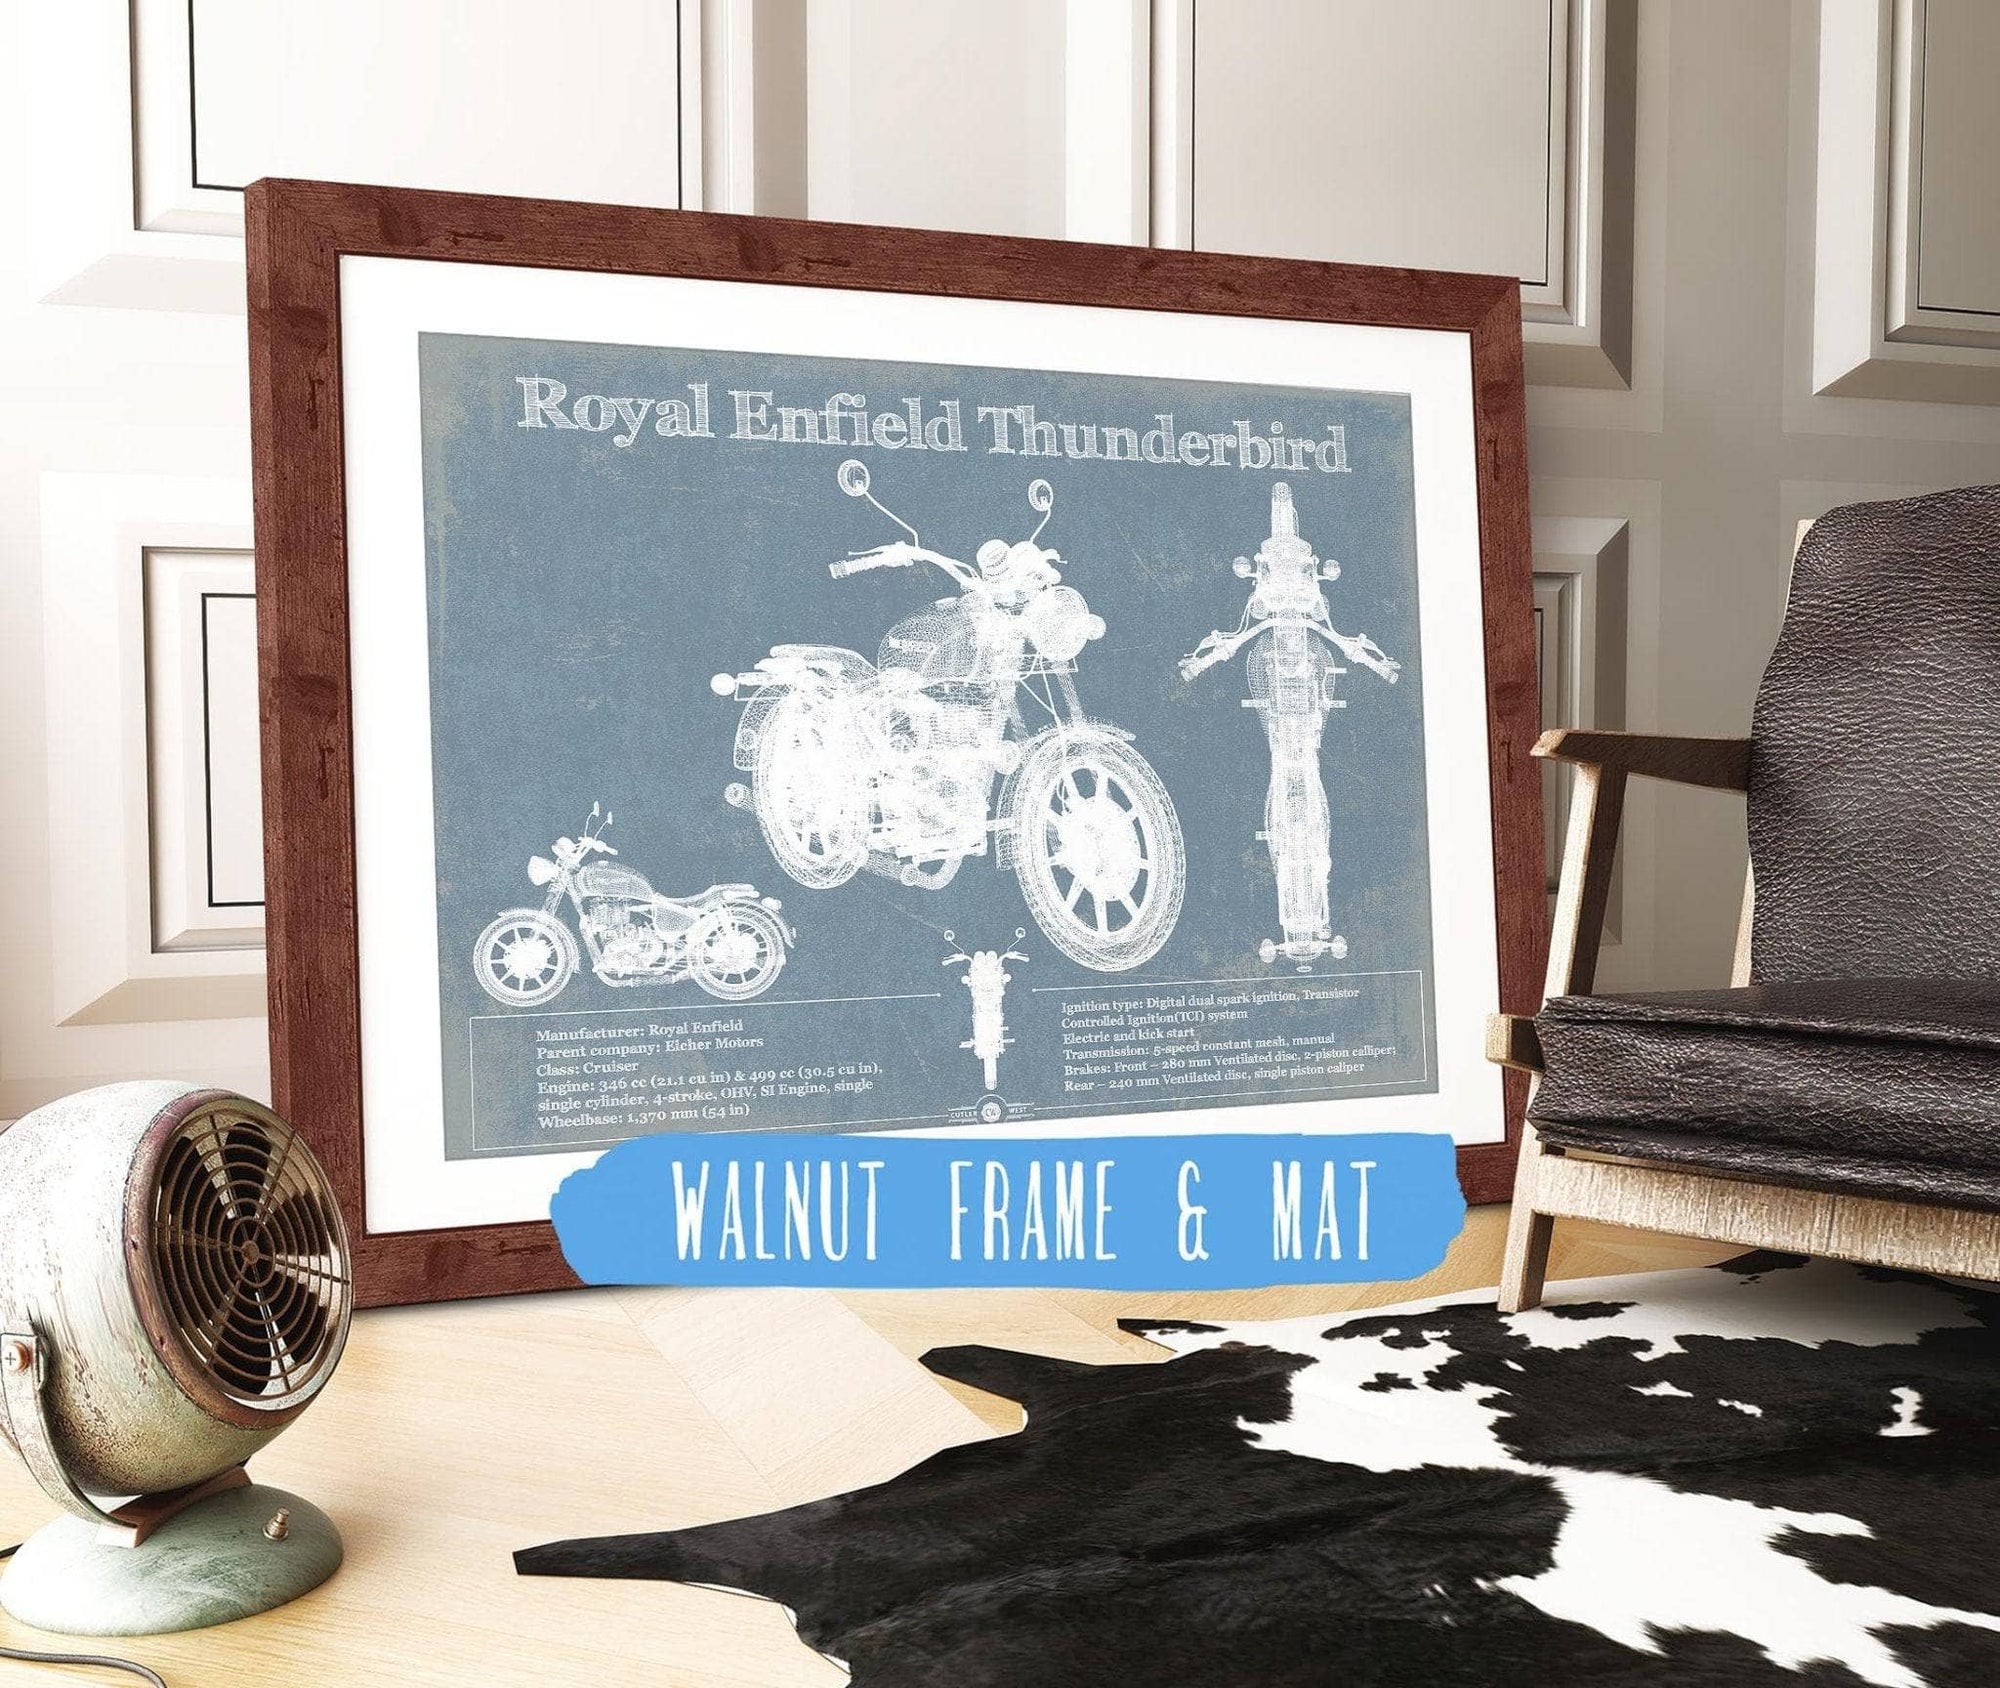 Cutler West 14" x 11" / Stretched Canvas Wrap Royal Enfield Thunderbird Blueprint Motorcycle Patent Print 933350106_17023